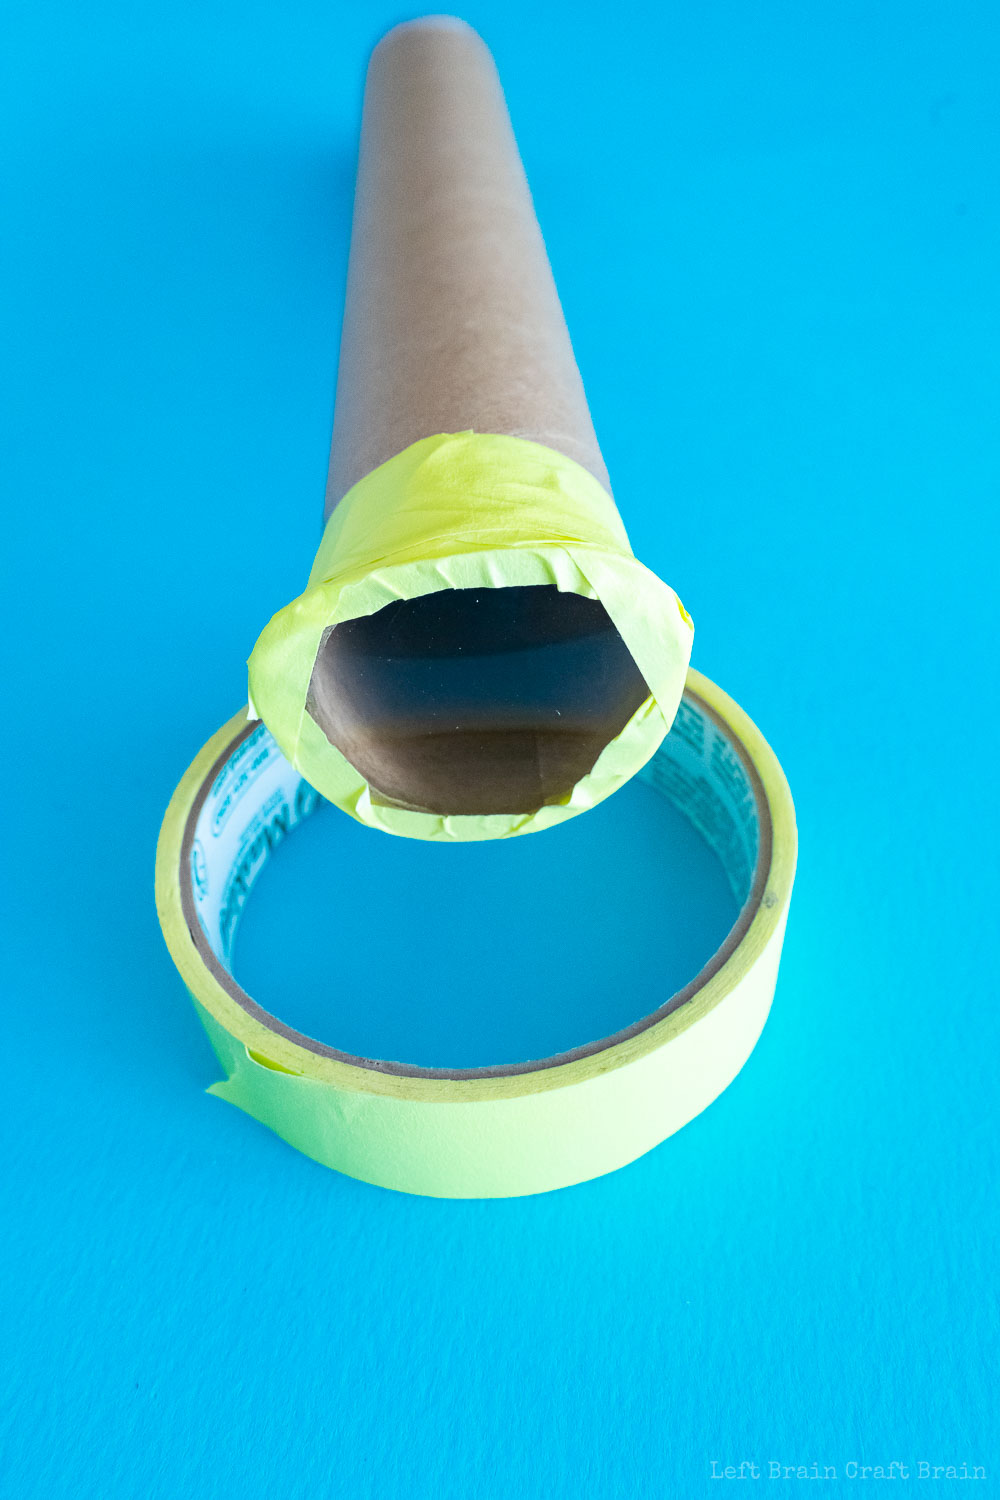 how to make a telescope - End view of paper towel roll with lens taped to end with yellow masking tape. Roll is sitting on yellow tape roll on blue paper